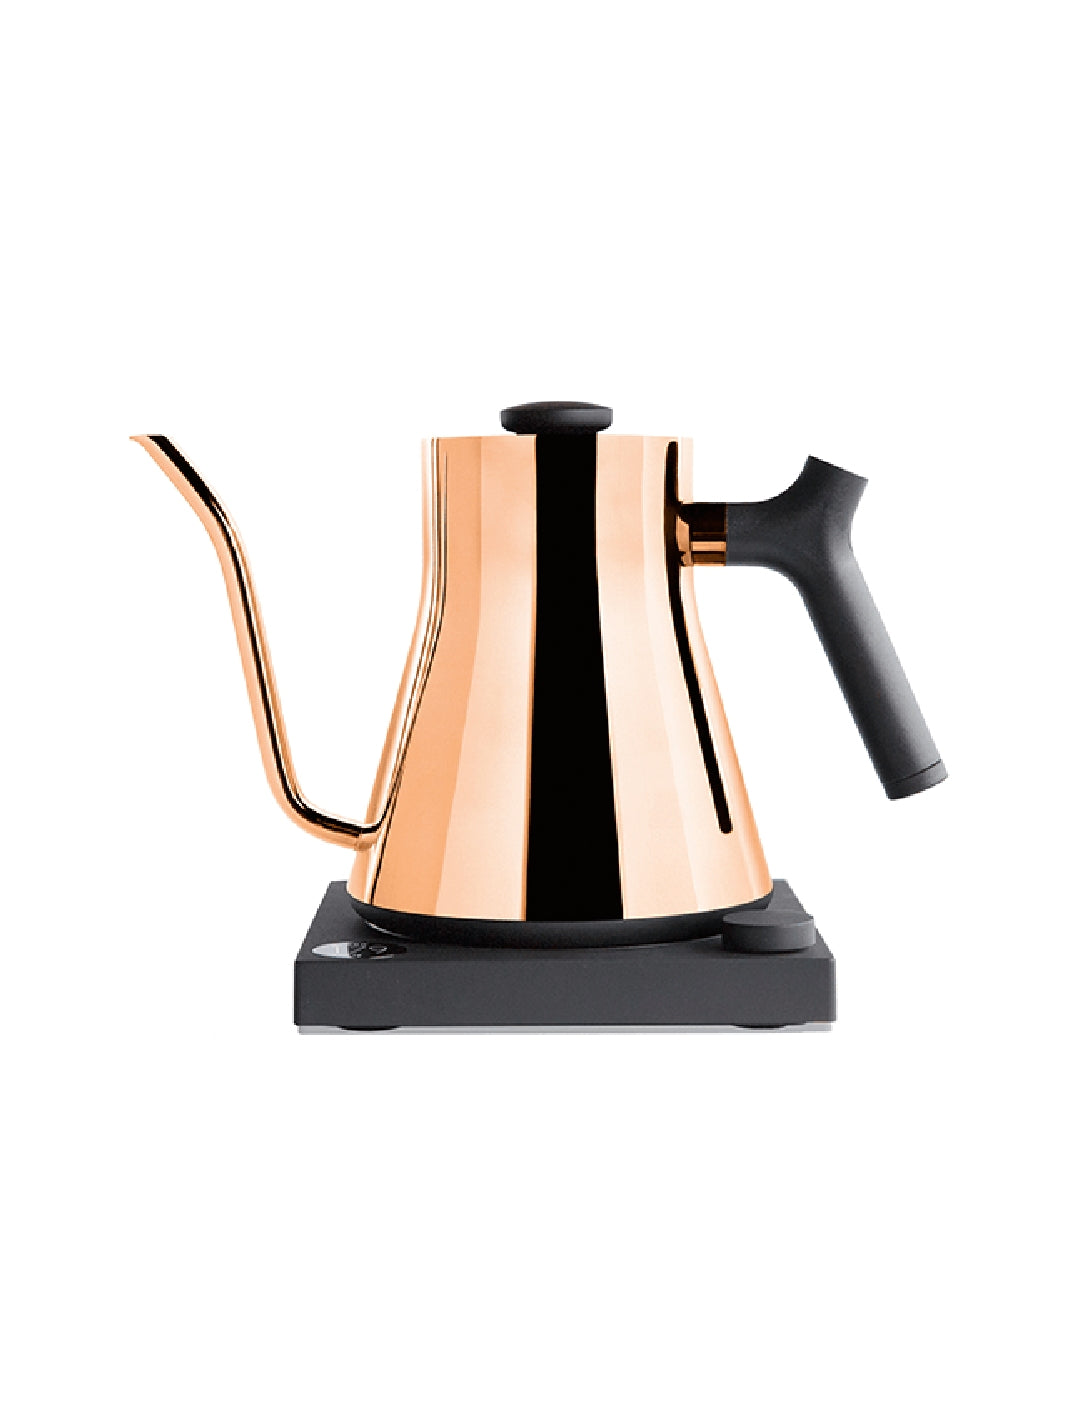 Fellow Stagg EKG Kettle Unboxing & Review for Tea (PINK) 